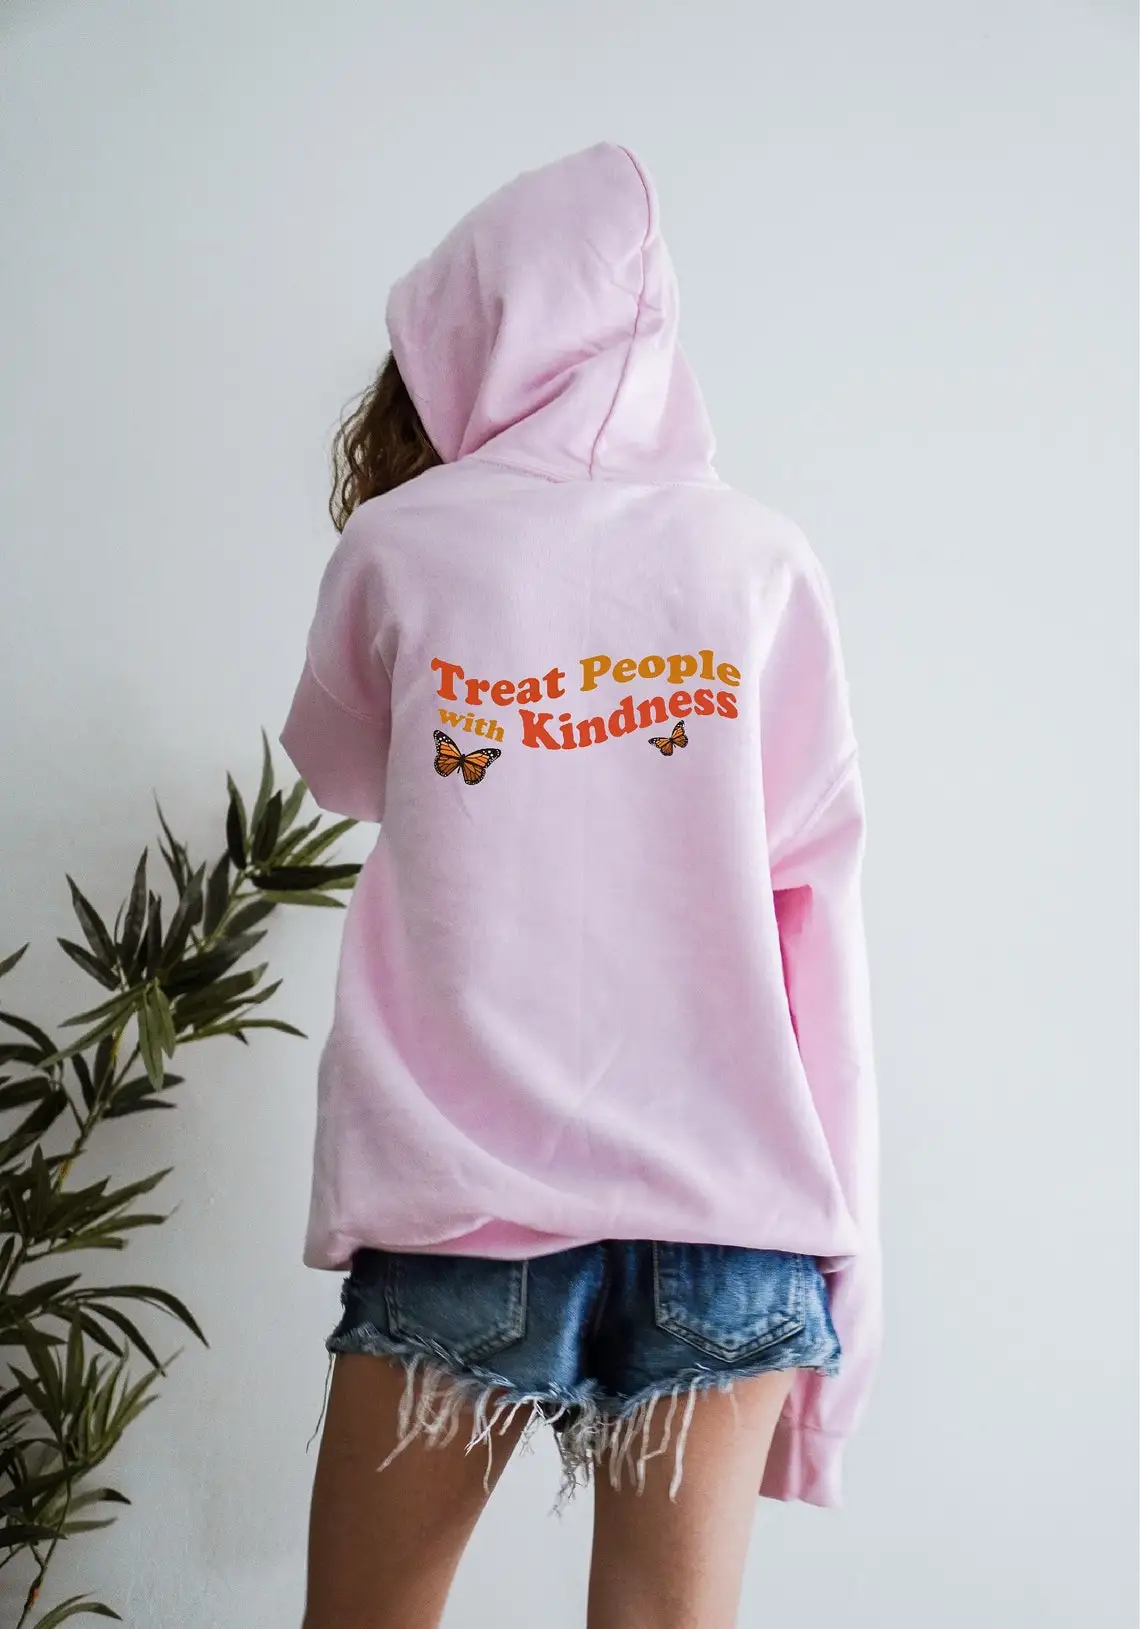 

Treat People With Kindness Hoodie Aesthetic butterfly graphic trendy quote pullovers youngs hipster vintage cotton gift tops